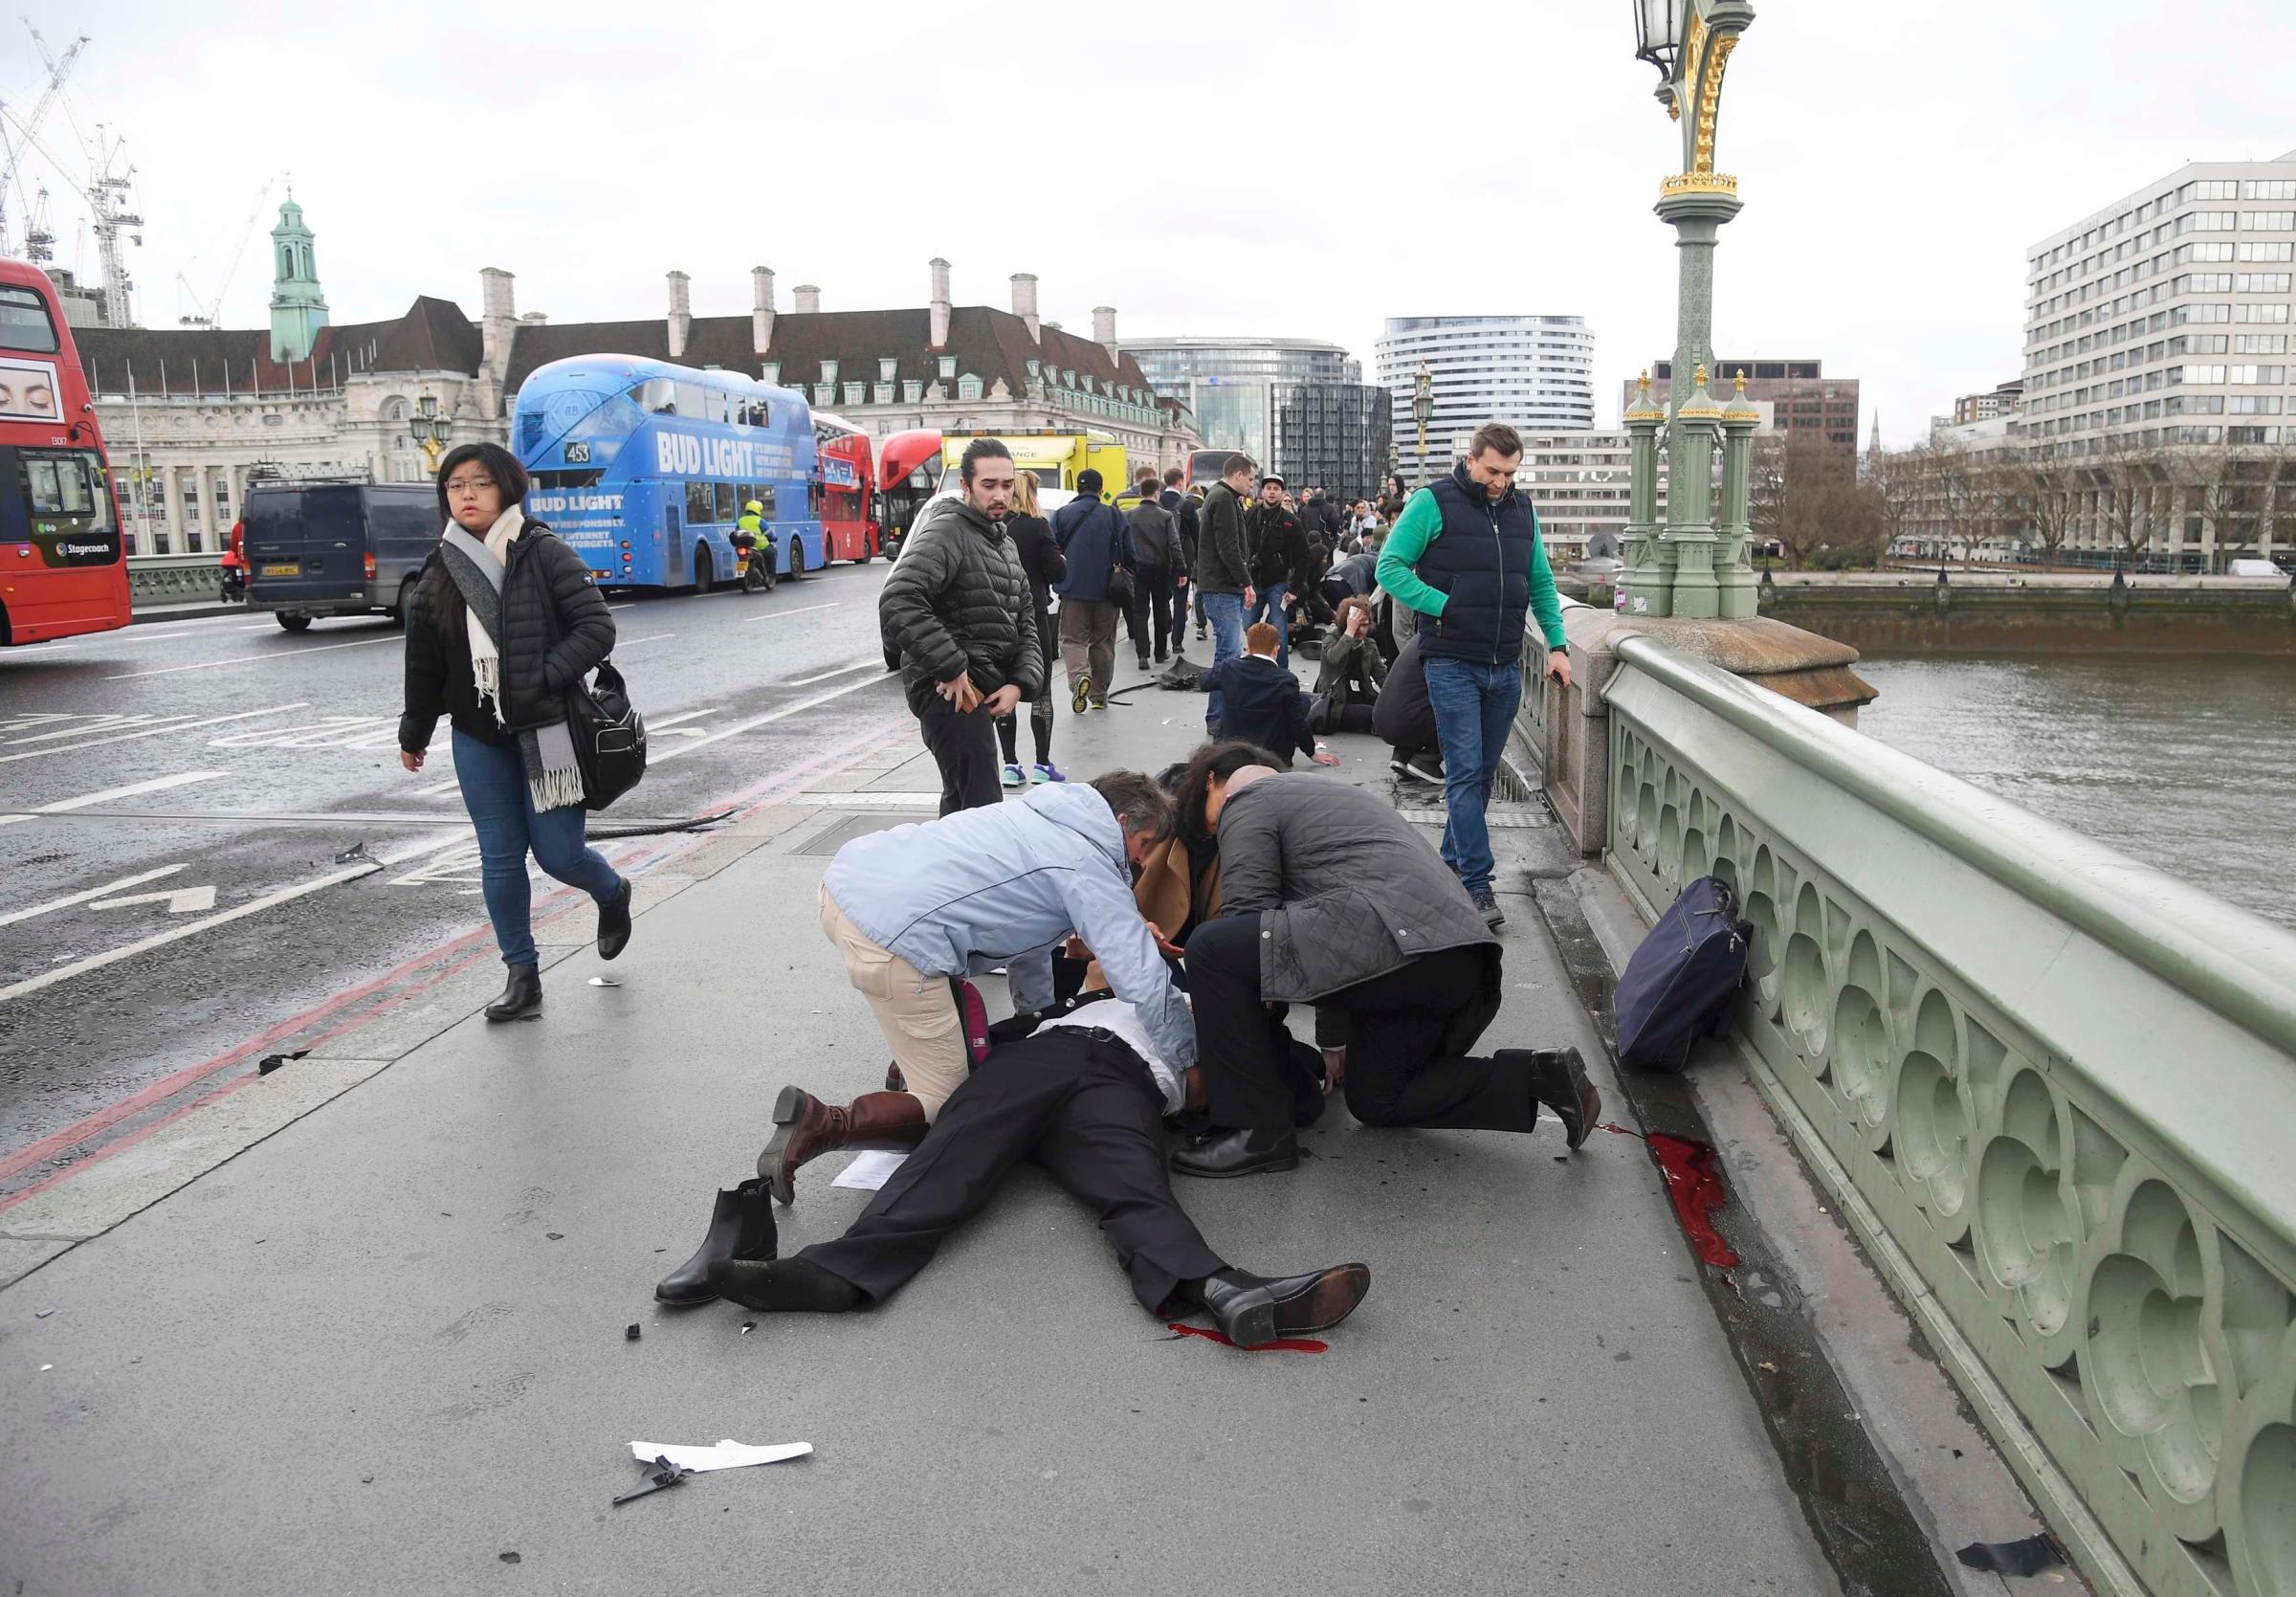 Injured people are assisted after an incident on Westminster Bridge in London